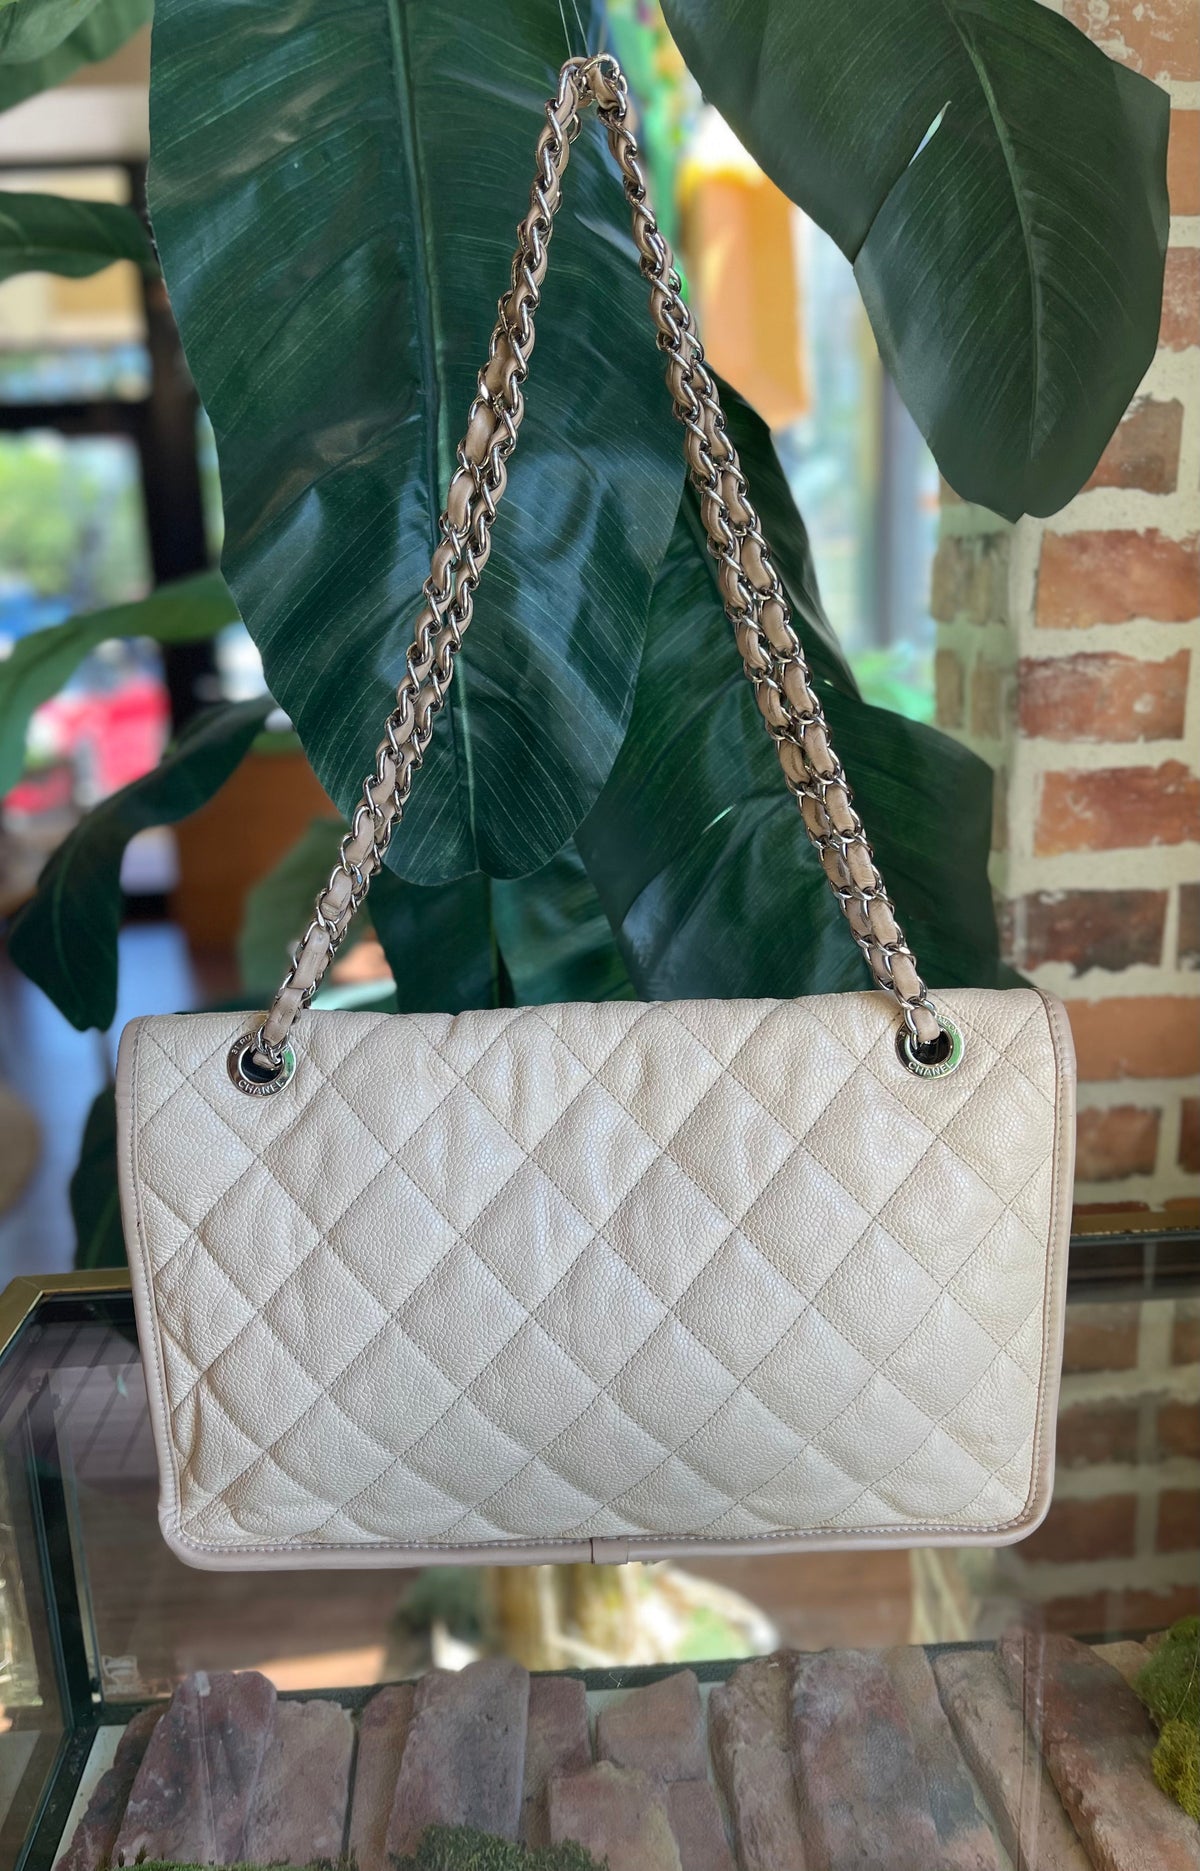 Chanel French Riviera Bag